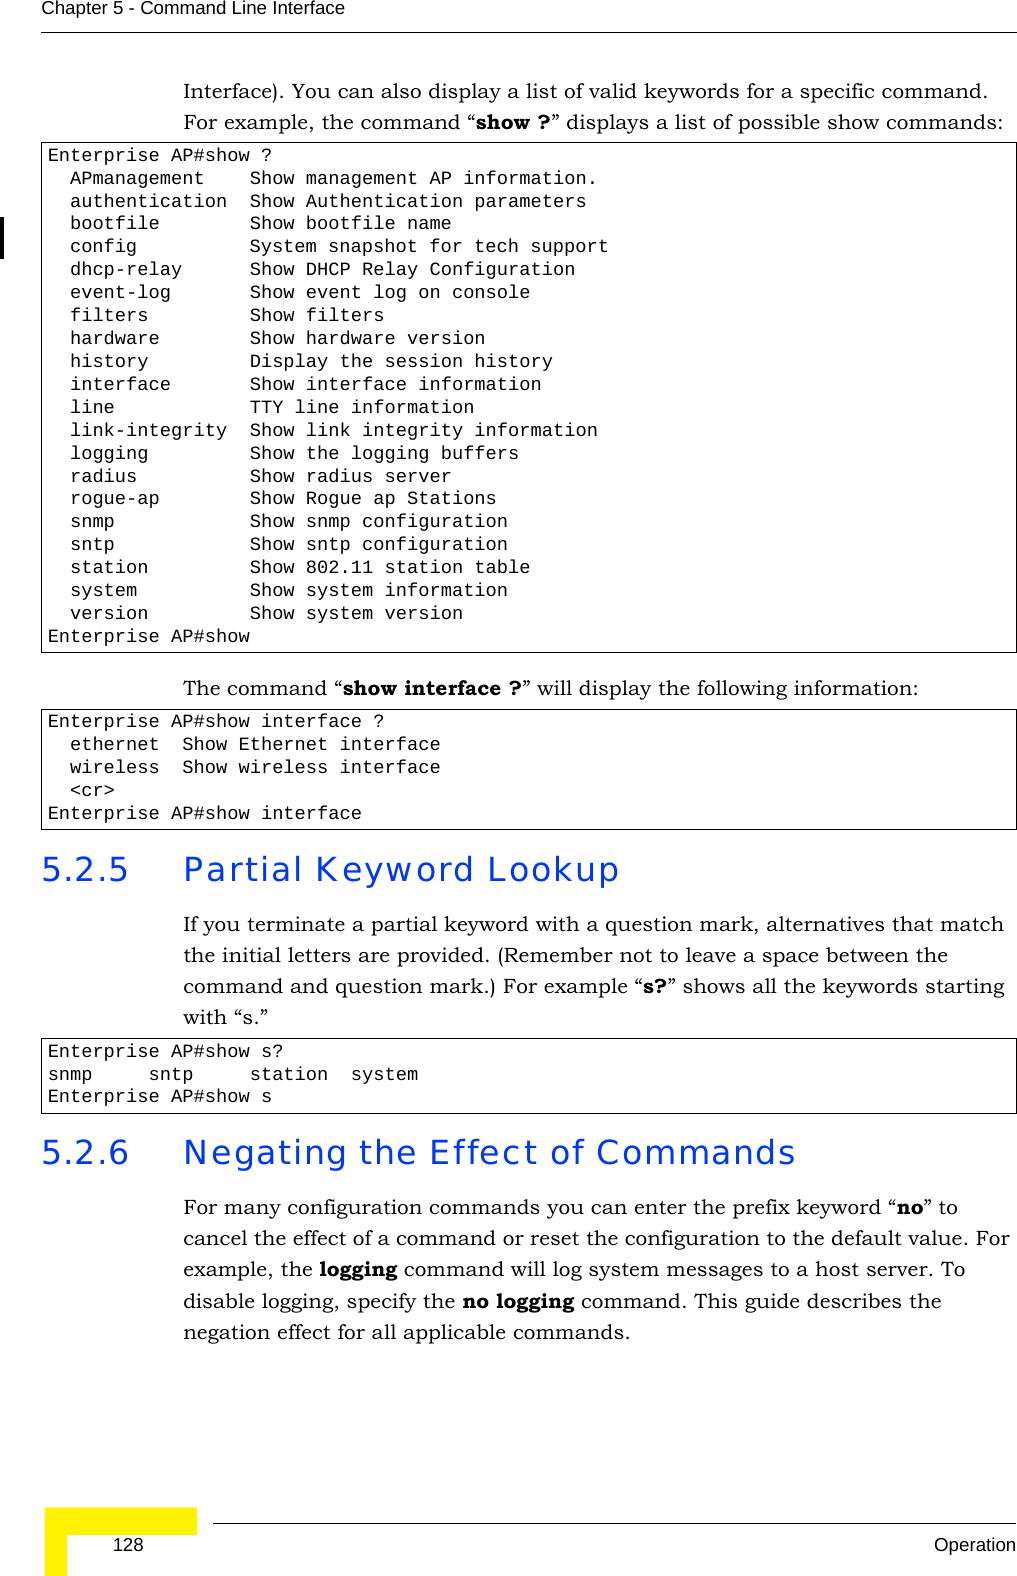  128 OperationChapter 5 - Command Line InterfaceInterface). You can also display a list of valid keywords for a specific command. For example, the command “show ?” displays a list of possible show commands:The command “show interface ?” will display the following information:5.2.5 Partial Keyword LookupIf you terminate a partial keyword with a question mark, alternatives that match the initial letters are provided. (Remember not to leave a space between the command and question mark.) For example “s?” shows all the keywords starting with “s.”5.2.6 Negating the Effect of CommandsFor many configuration commands you can enter the prefix keyword “no” to cancel the effect of a command or reset the configuration to the default value. For example, the logging command will log system messages to a host server. To disable logging, specify the no logging command. This guide describes the negation effect for all applicable commands.Enterprise AP#show ?  APmanagement    Show management AP information.  authentication  Show Authentication parameters  bootfile        Show bootfile name  config          System snapshot for tech support  dhcp-relay      Show DHCP Relay Configuration  event-log       Show event log on console  filters         Show filters  hardware        Show hardware version  history         Display the session history  interface       Show interface information  line            TTY line information  link-integrity  Show link integrity information  logging         Show the logging buffers  radius          Show radius server  rogue-ap        Show Rogue ap Stations  snmp            Show snmp configuration  sntp            Show sntp configuration  station         Show 802.11 station table  system          Show system information  version         Show system versionEnterprise AP#showEnterprise AP#show interface ?  ethernet  Show Ethernet interface  wireless  Show wireless interface  &lt;cr&gt;Enterprise AP#show interfaceEnterprise AP#show s?snmp     sntp     station  systemEnterprise AP#show s